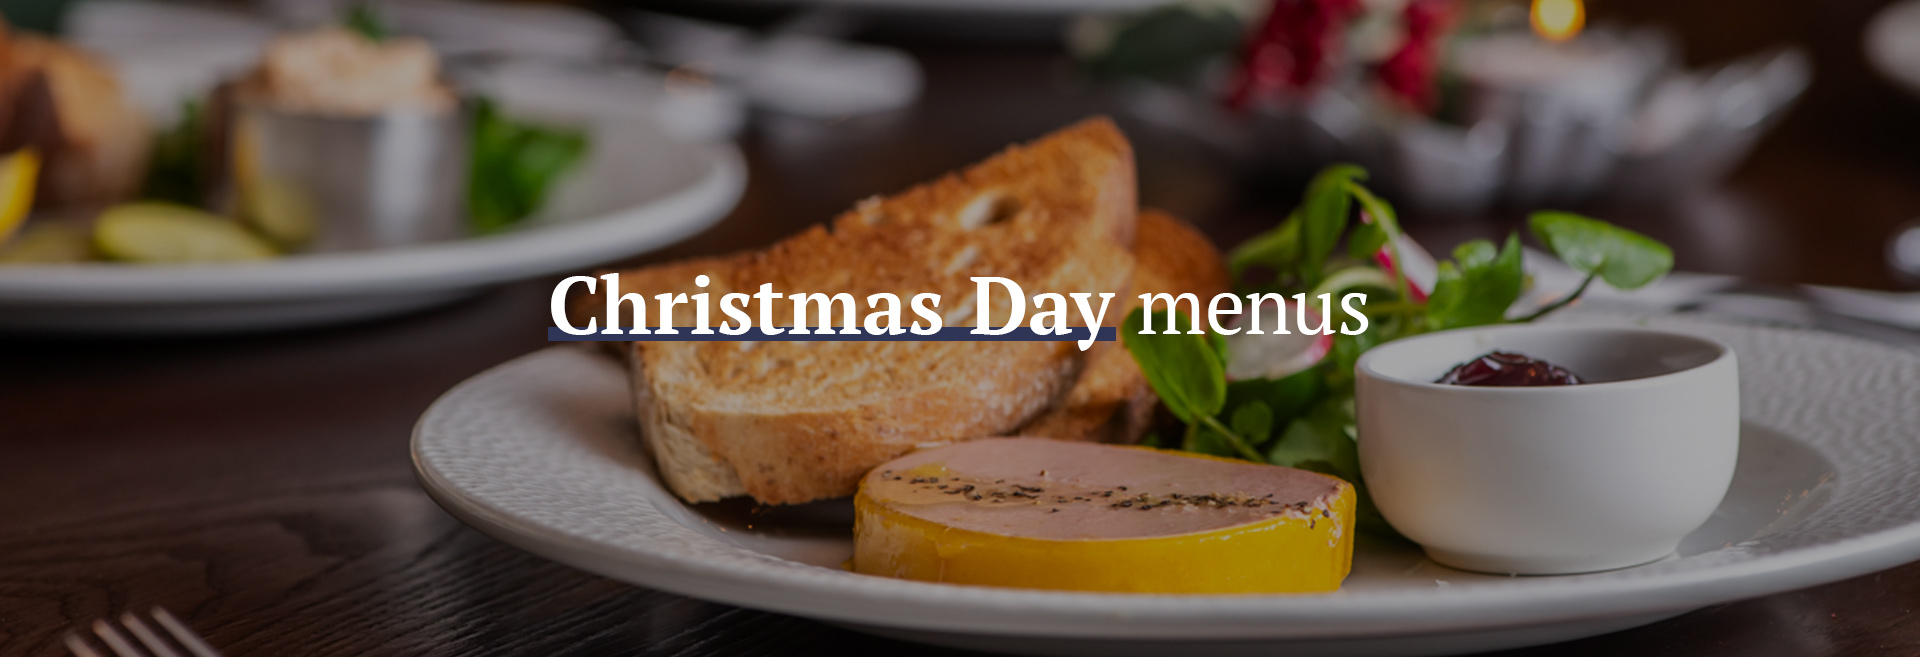 Christmas Day Menu at The White Horse Hotel